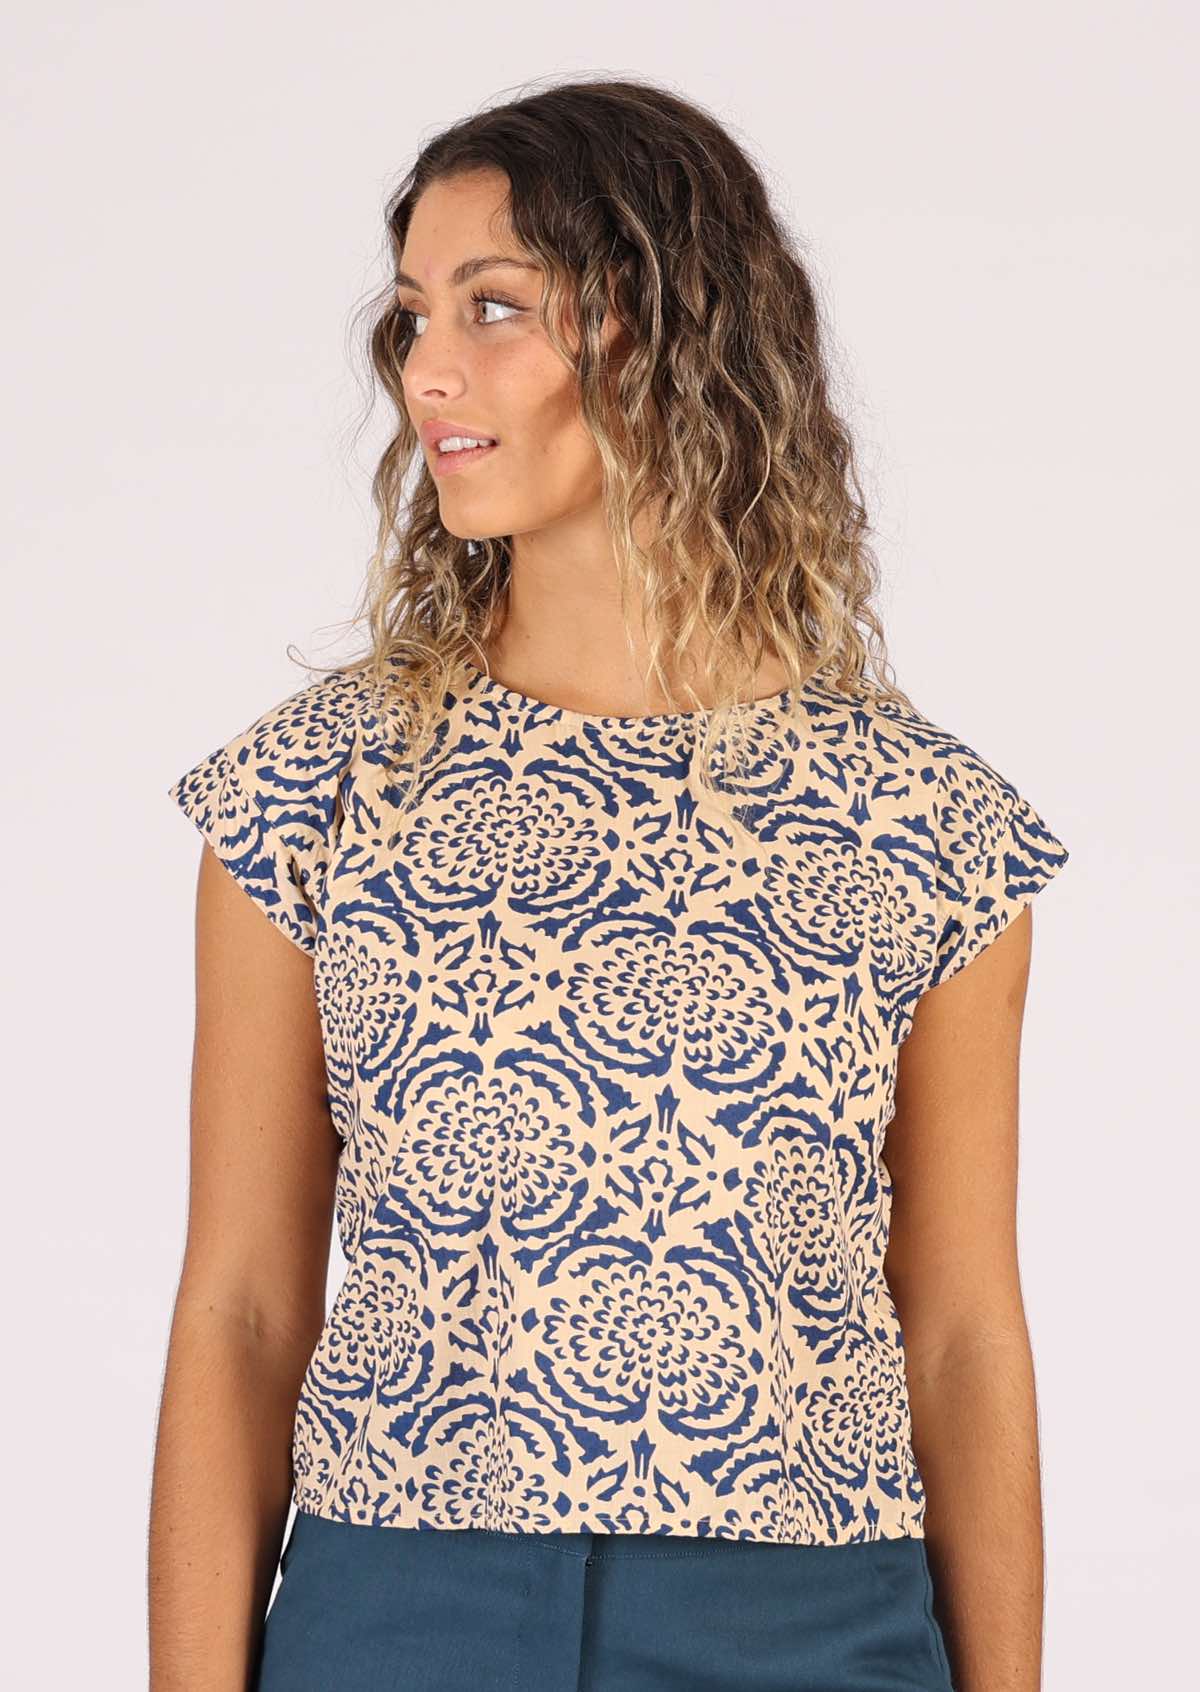 Simple cotton cap sleeve top with blue block print on cream base